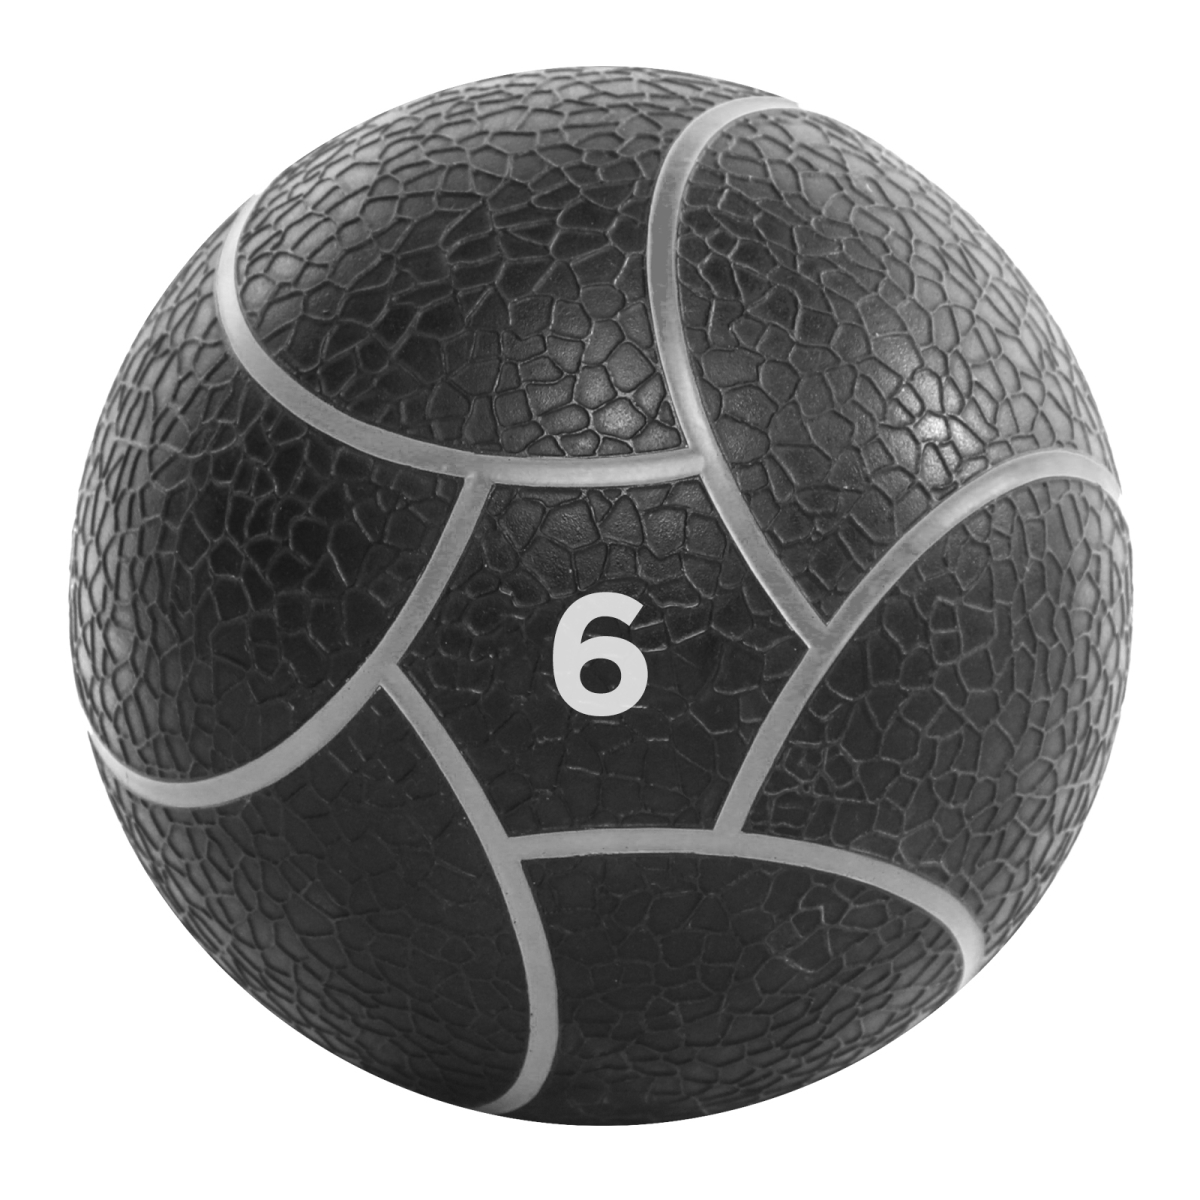 Picture of Power Systems 25706 Elite Power Med Ball Prime 6 lb. Gray